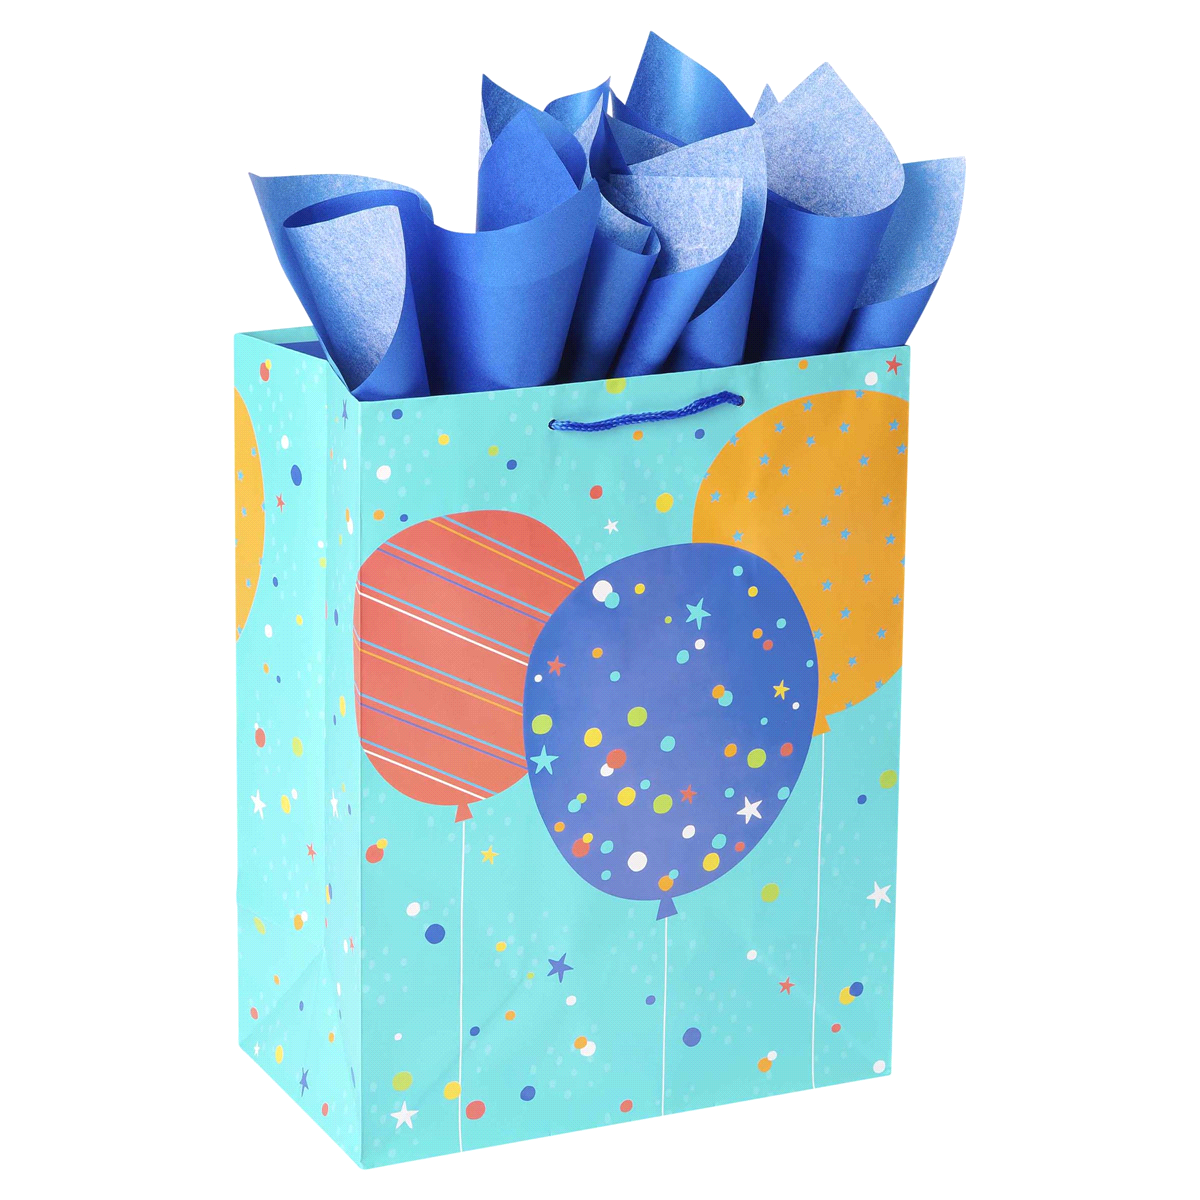 American Greetings Tissue Paper, Blue 1 ct